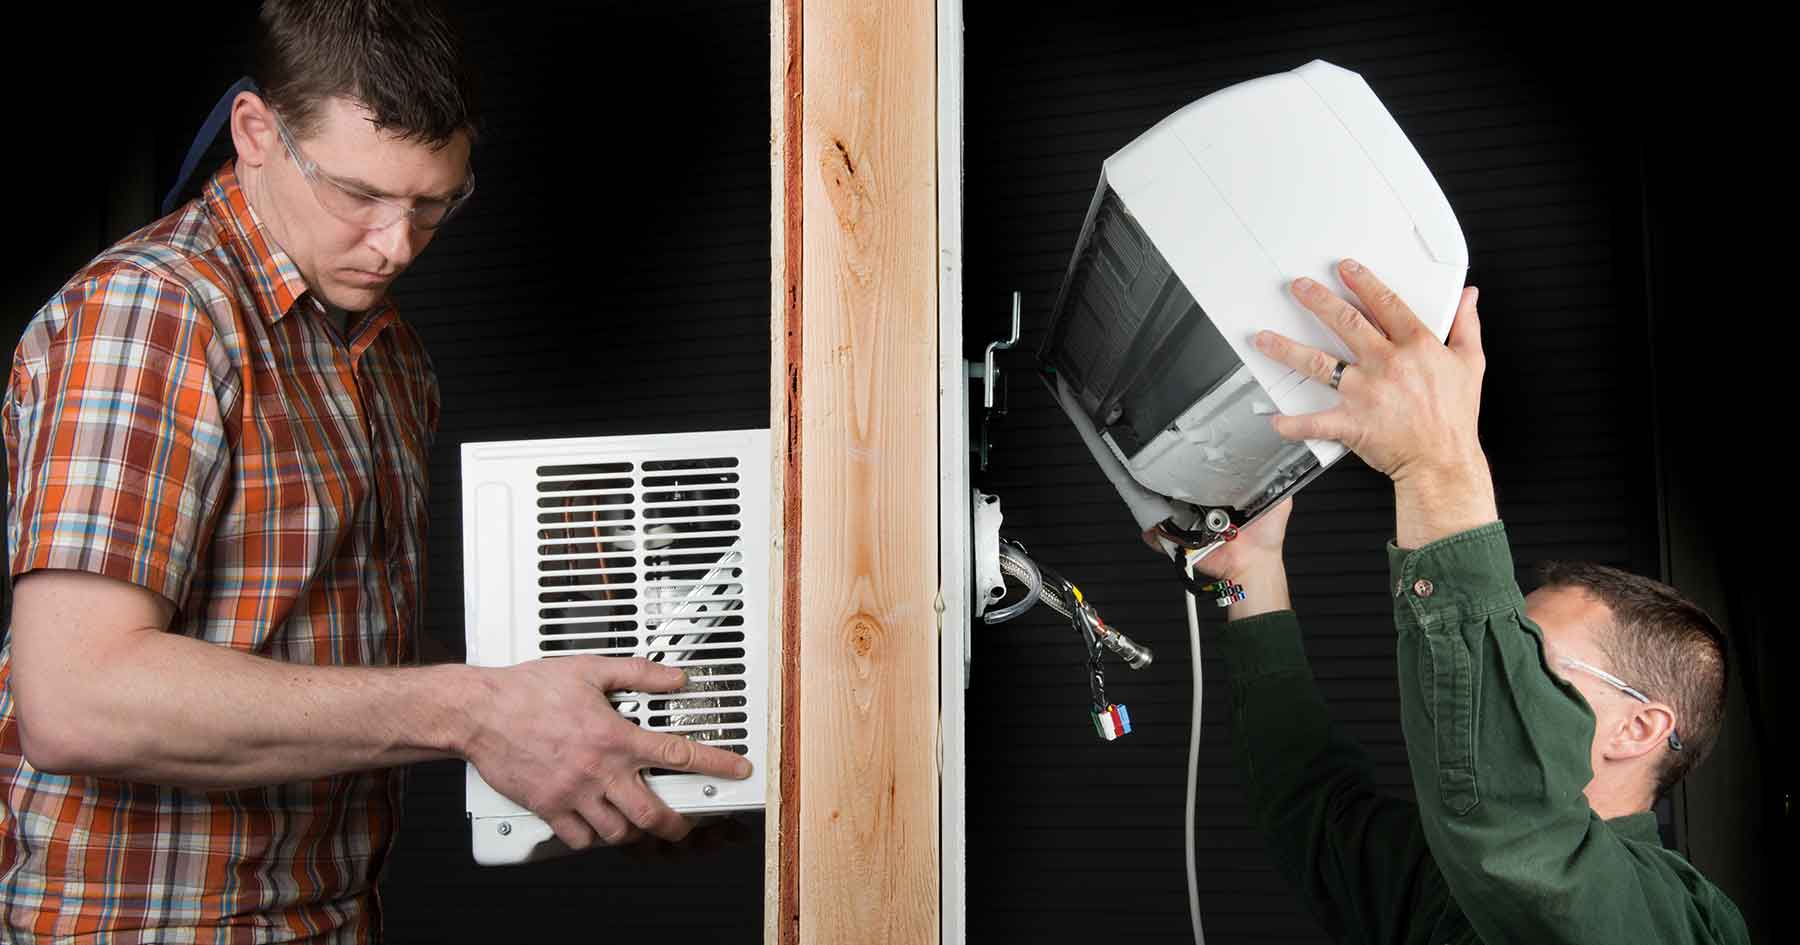 Two men shown on opposite sides of a wall installing the EcoSnap-AC Heat Pump System